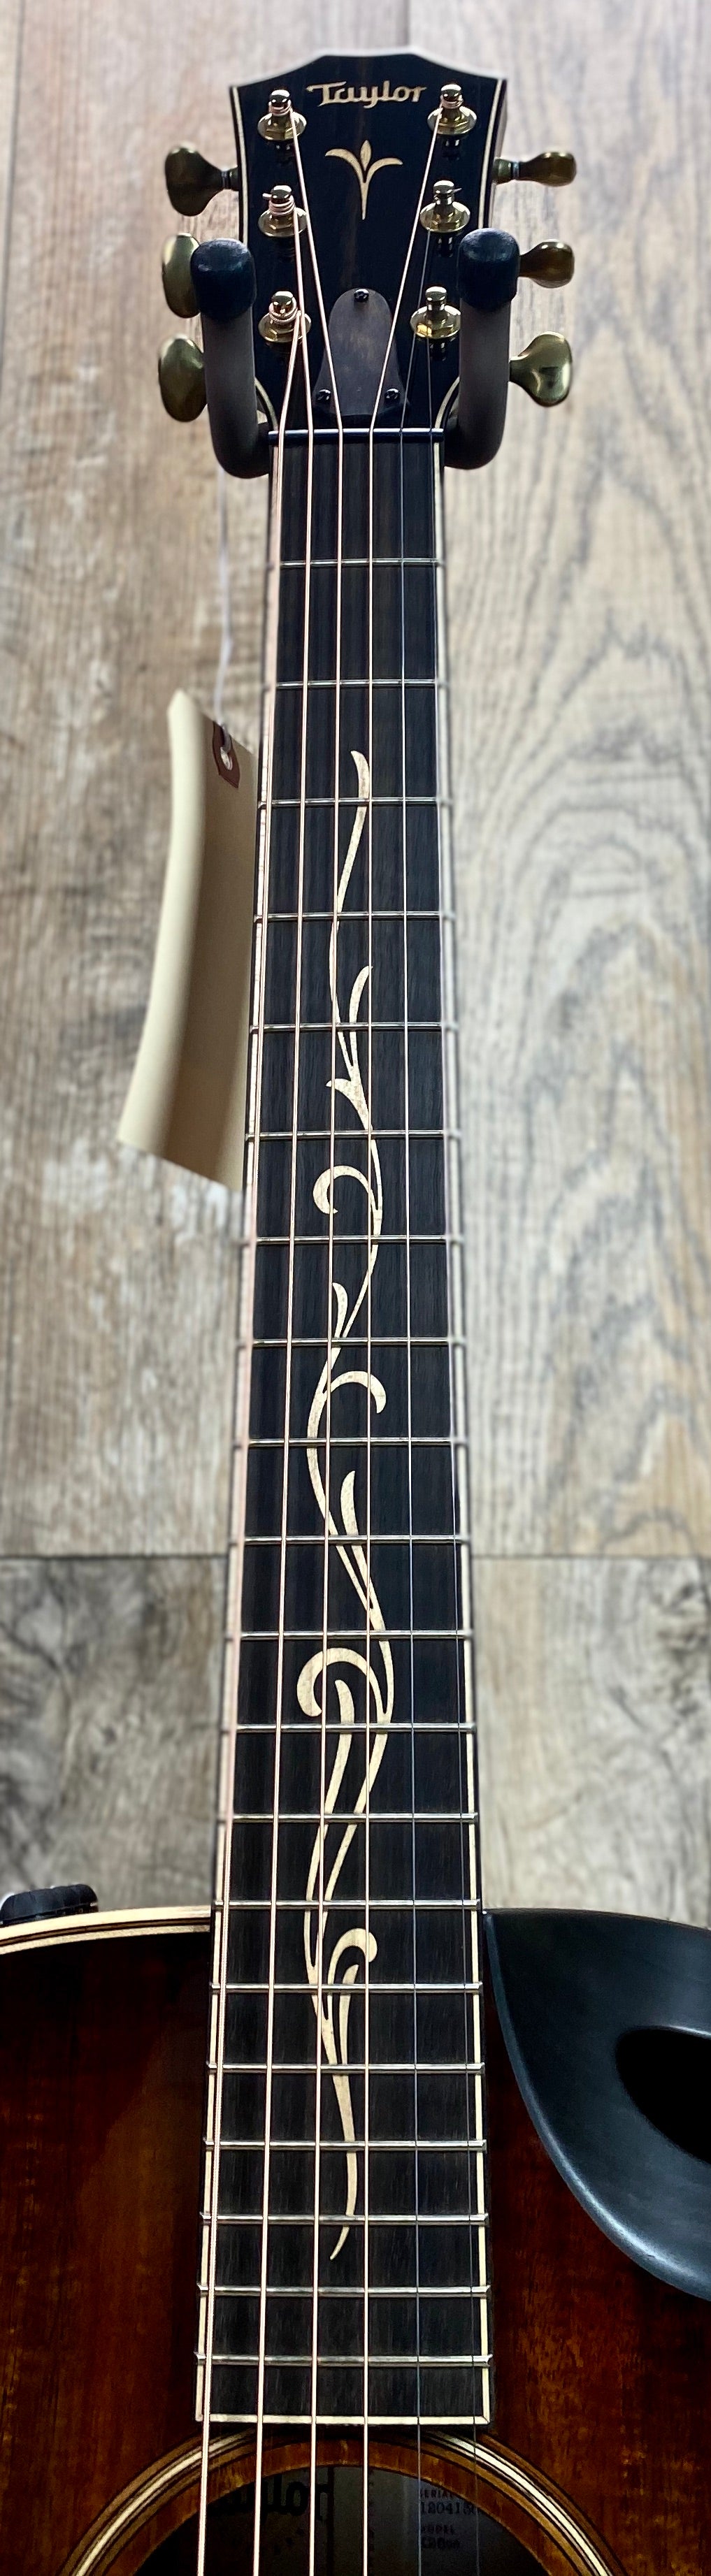 Taylor K26ce Acoustic Guitar fretboard and headstock Tone Shop Guitars Dallas Fort Worth